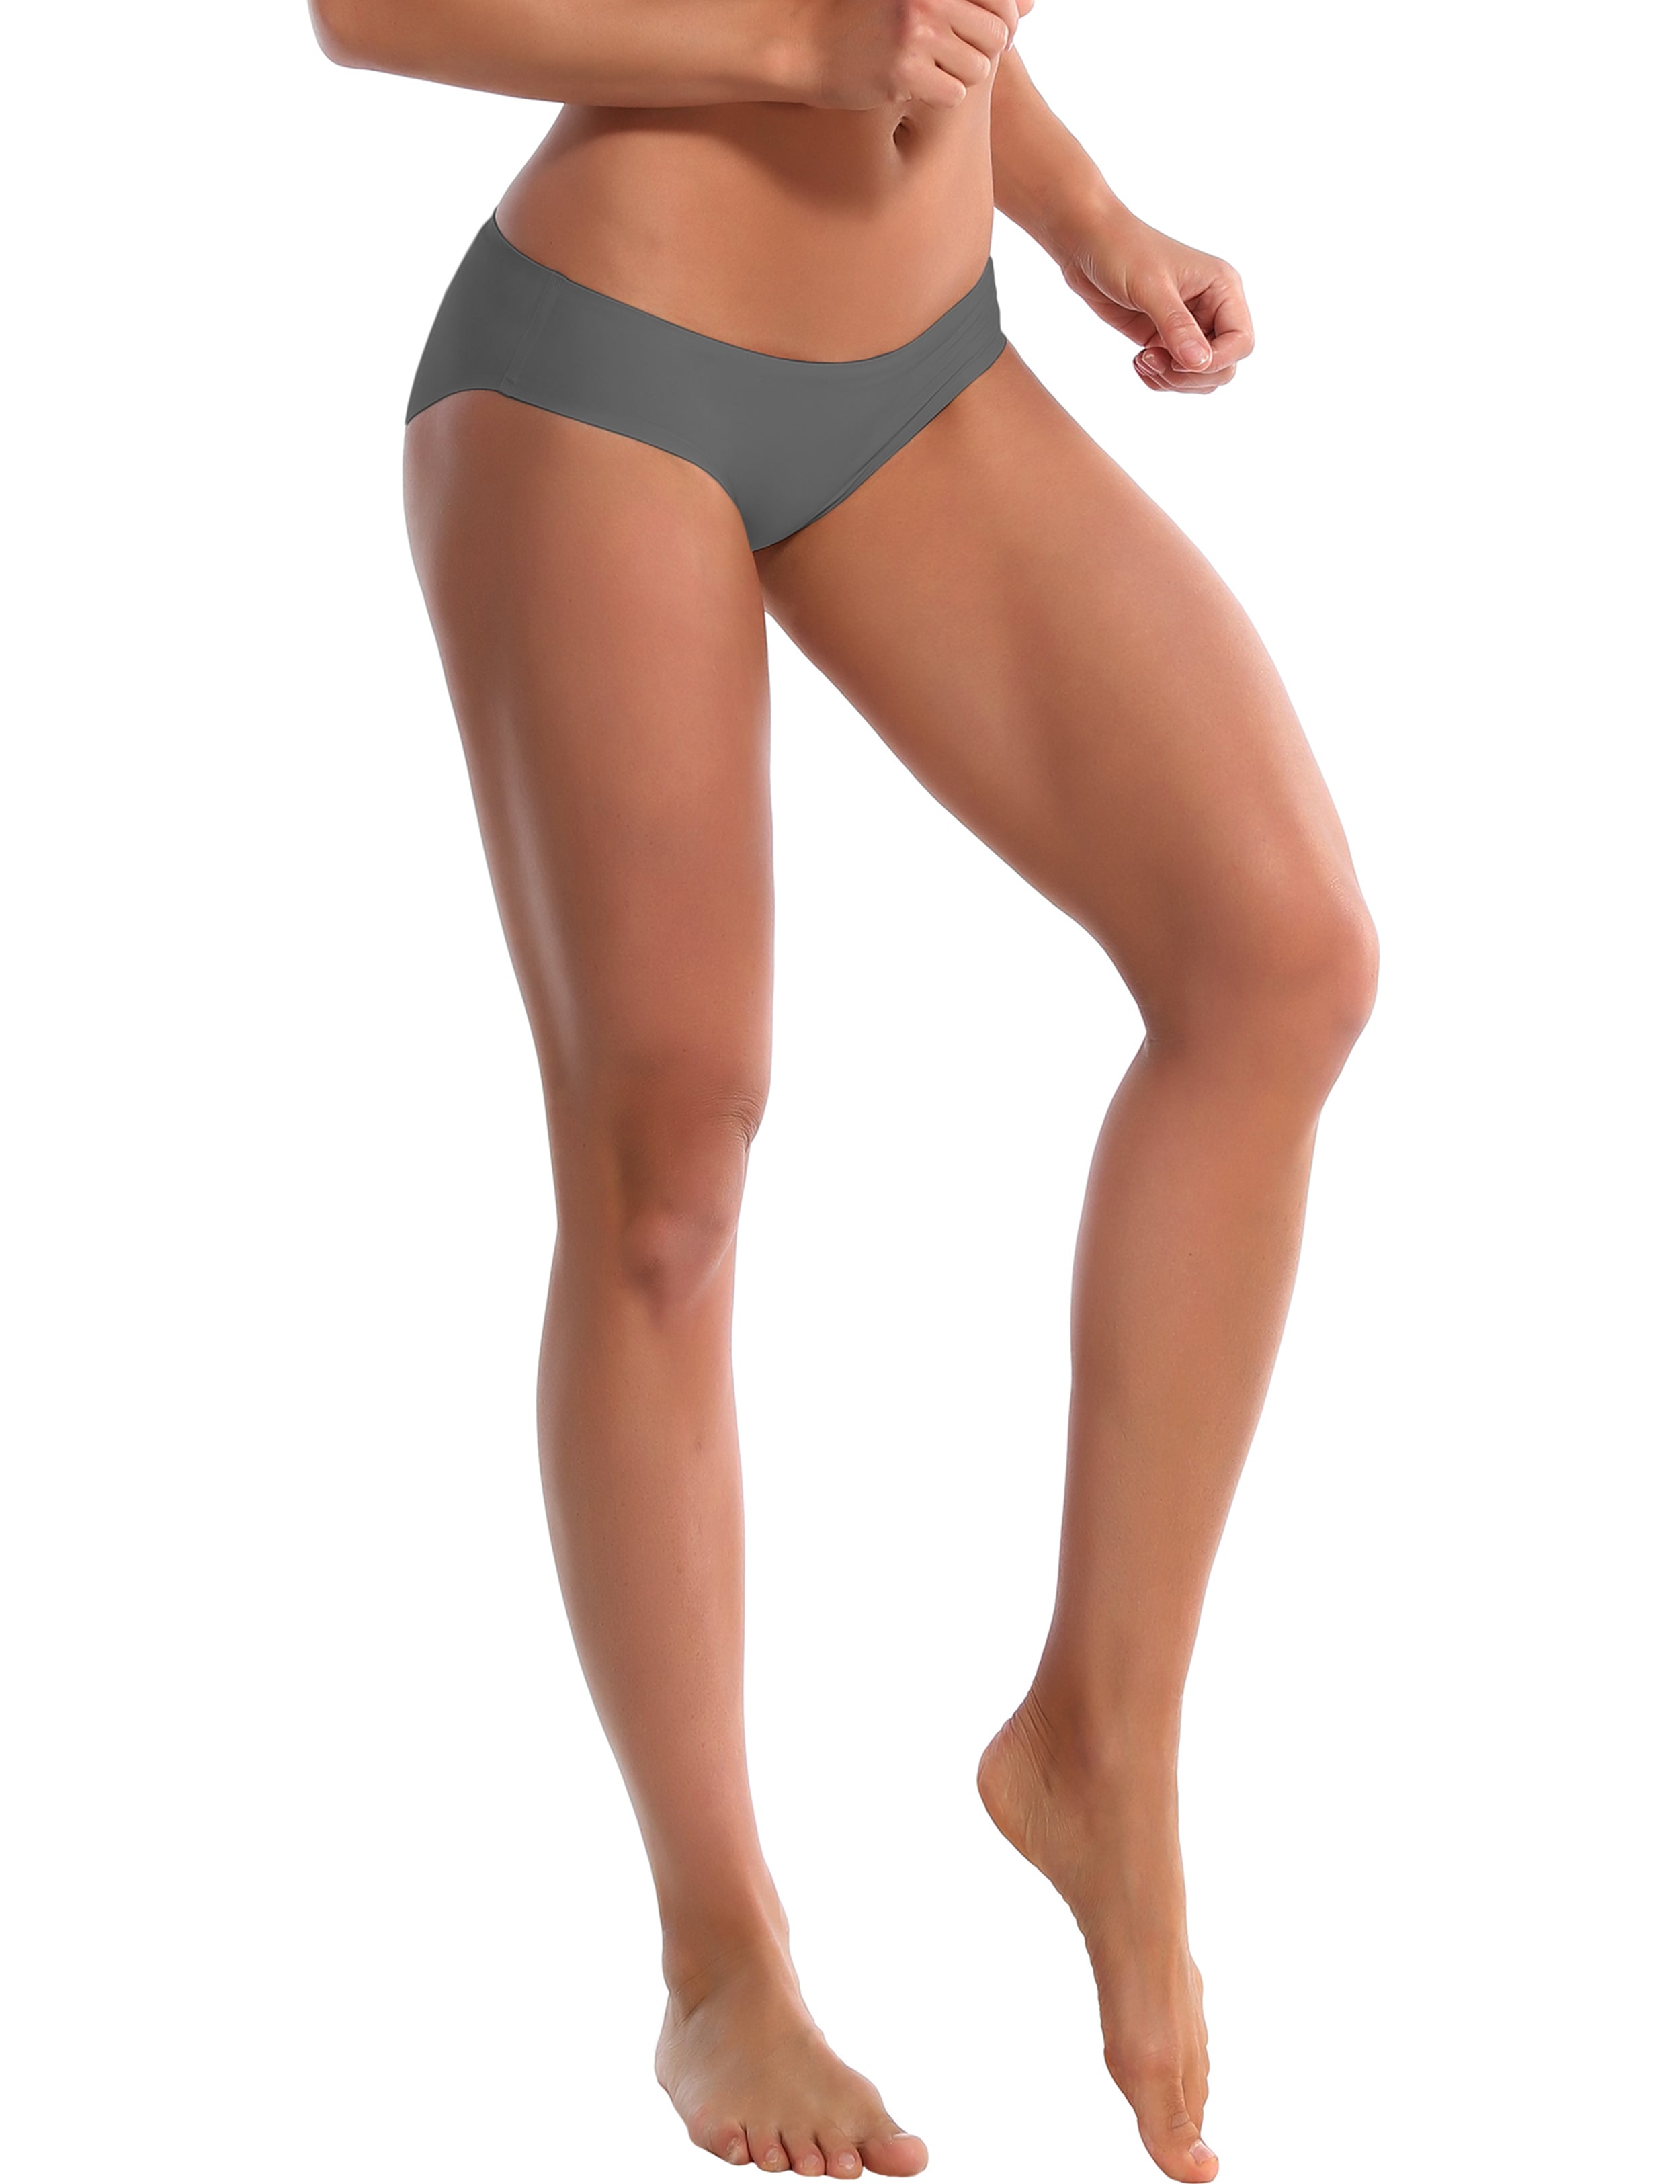 Invisibles Sport Bikini Panties darkgray Sleek, soft, smooth and totally comfortable: our newest bikini style is here. High elasticity High density Softest-ever fabric Laser cutting Unsealed Comfortable No panty lines Machine wash 95% Nylon, 5% Spandex